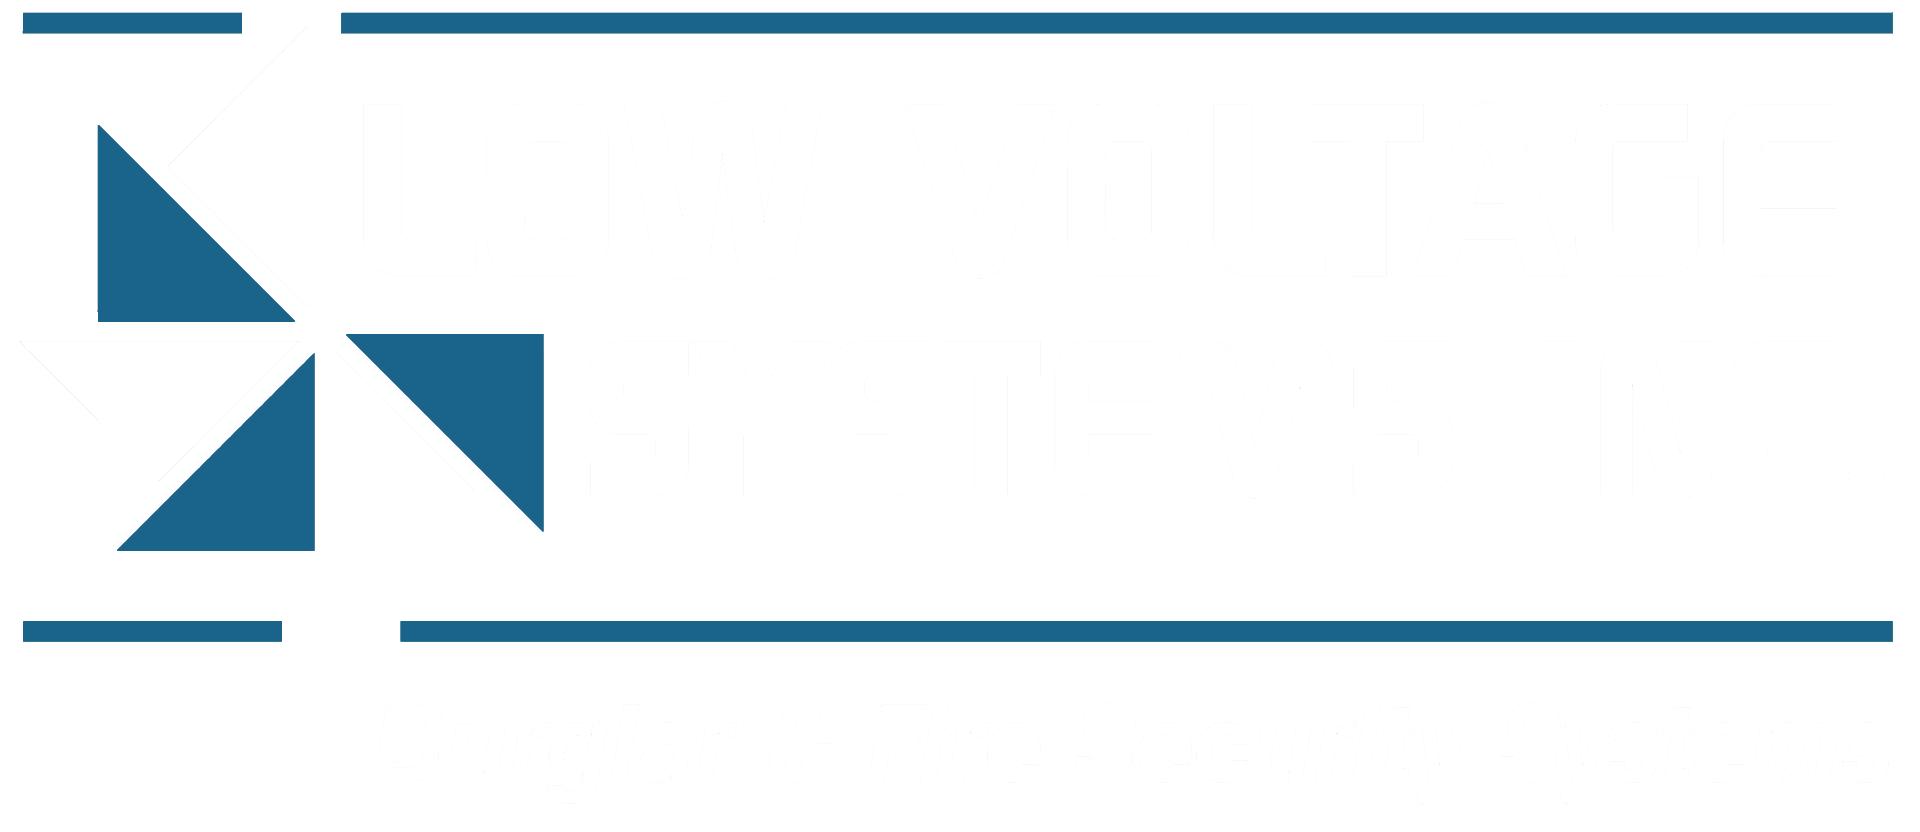 Low Voltage Systems